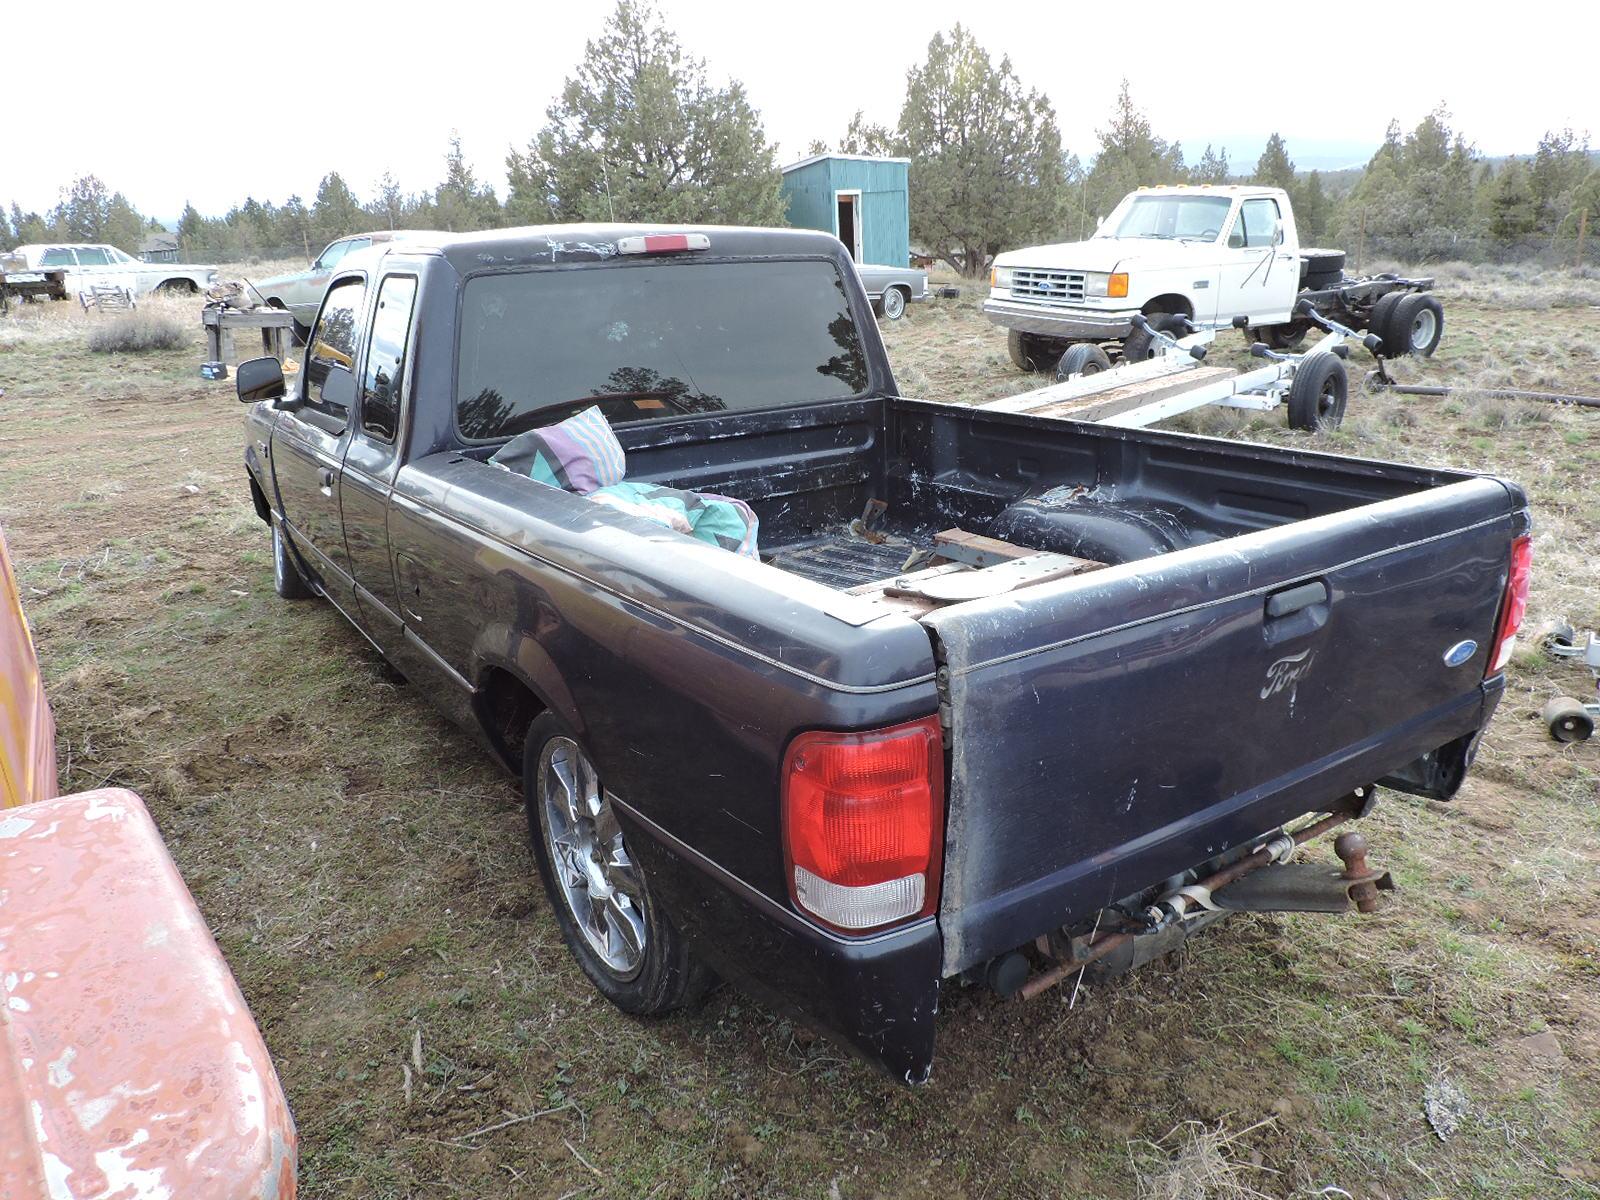 2000 Ford Ranger Pickup 2WD Manual Transmission / Cust. Susp. - Project